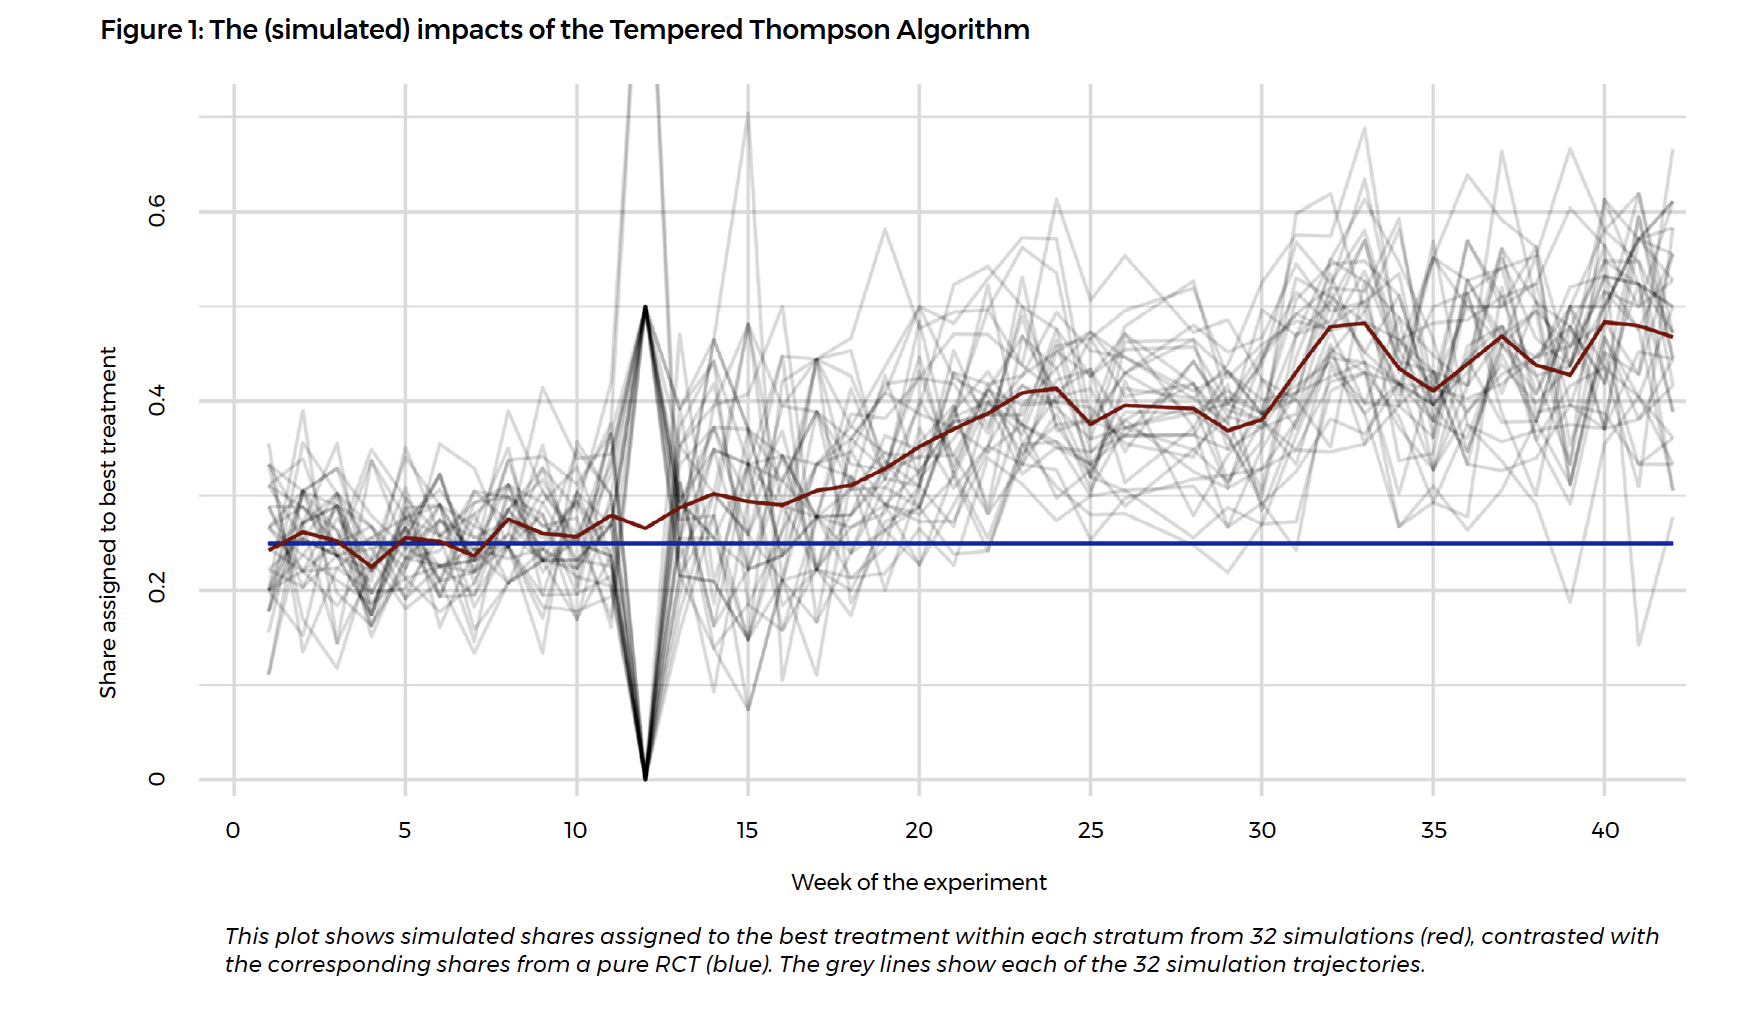 Figure 1: The (simulated) impacts of the Tempered Thompson Algorithm